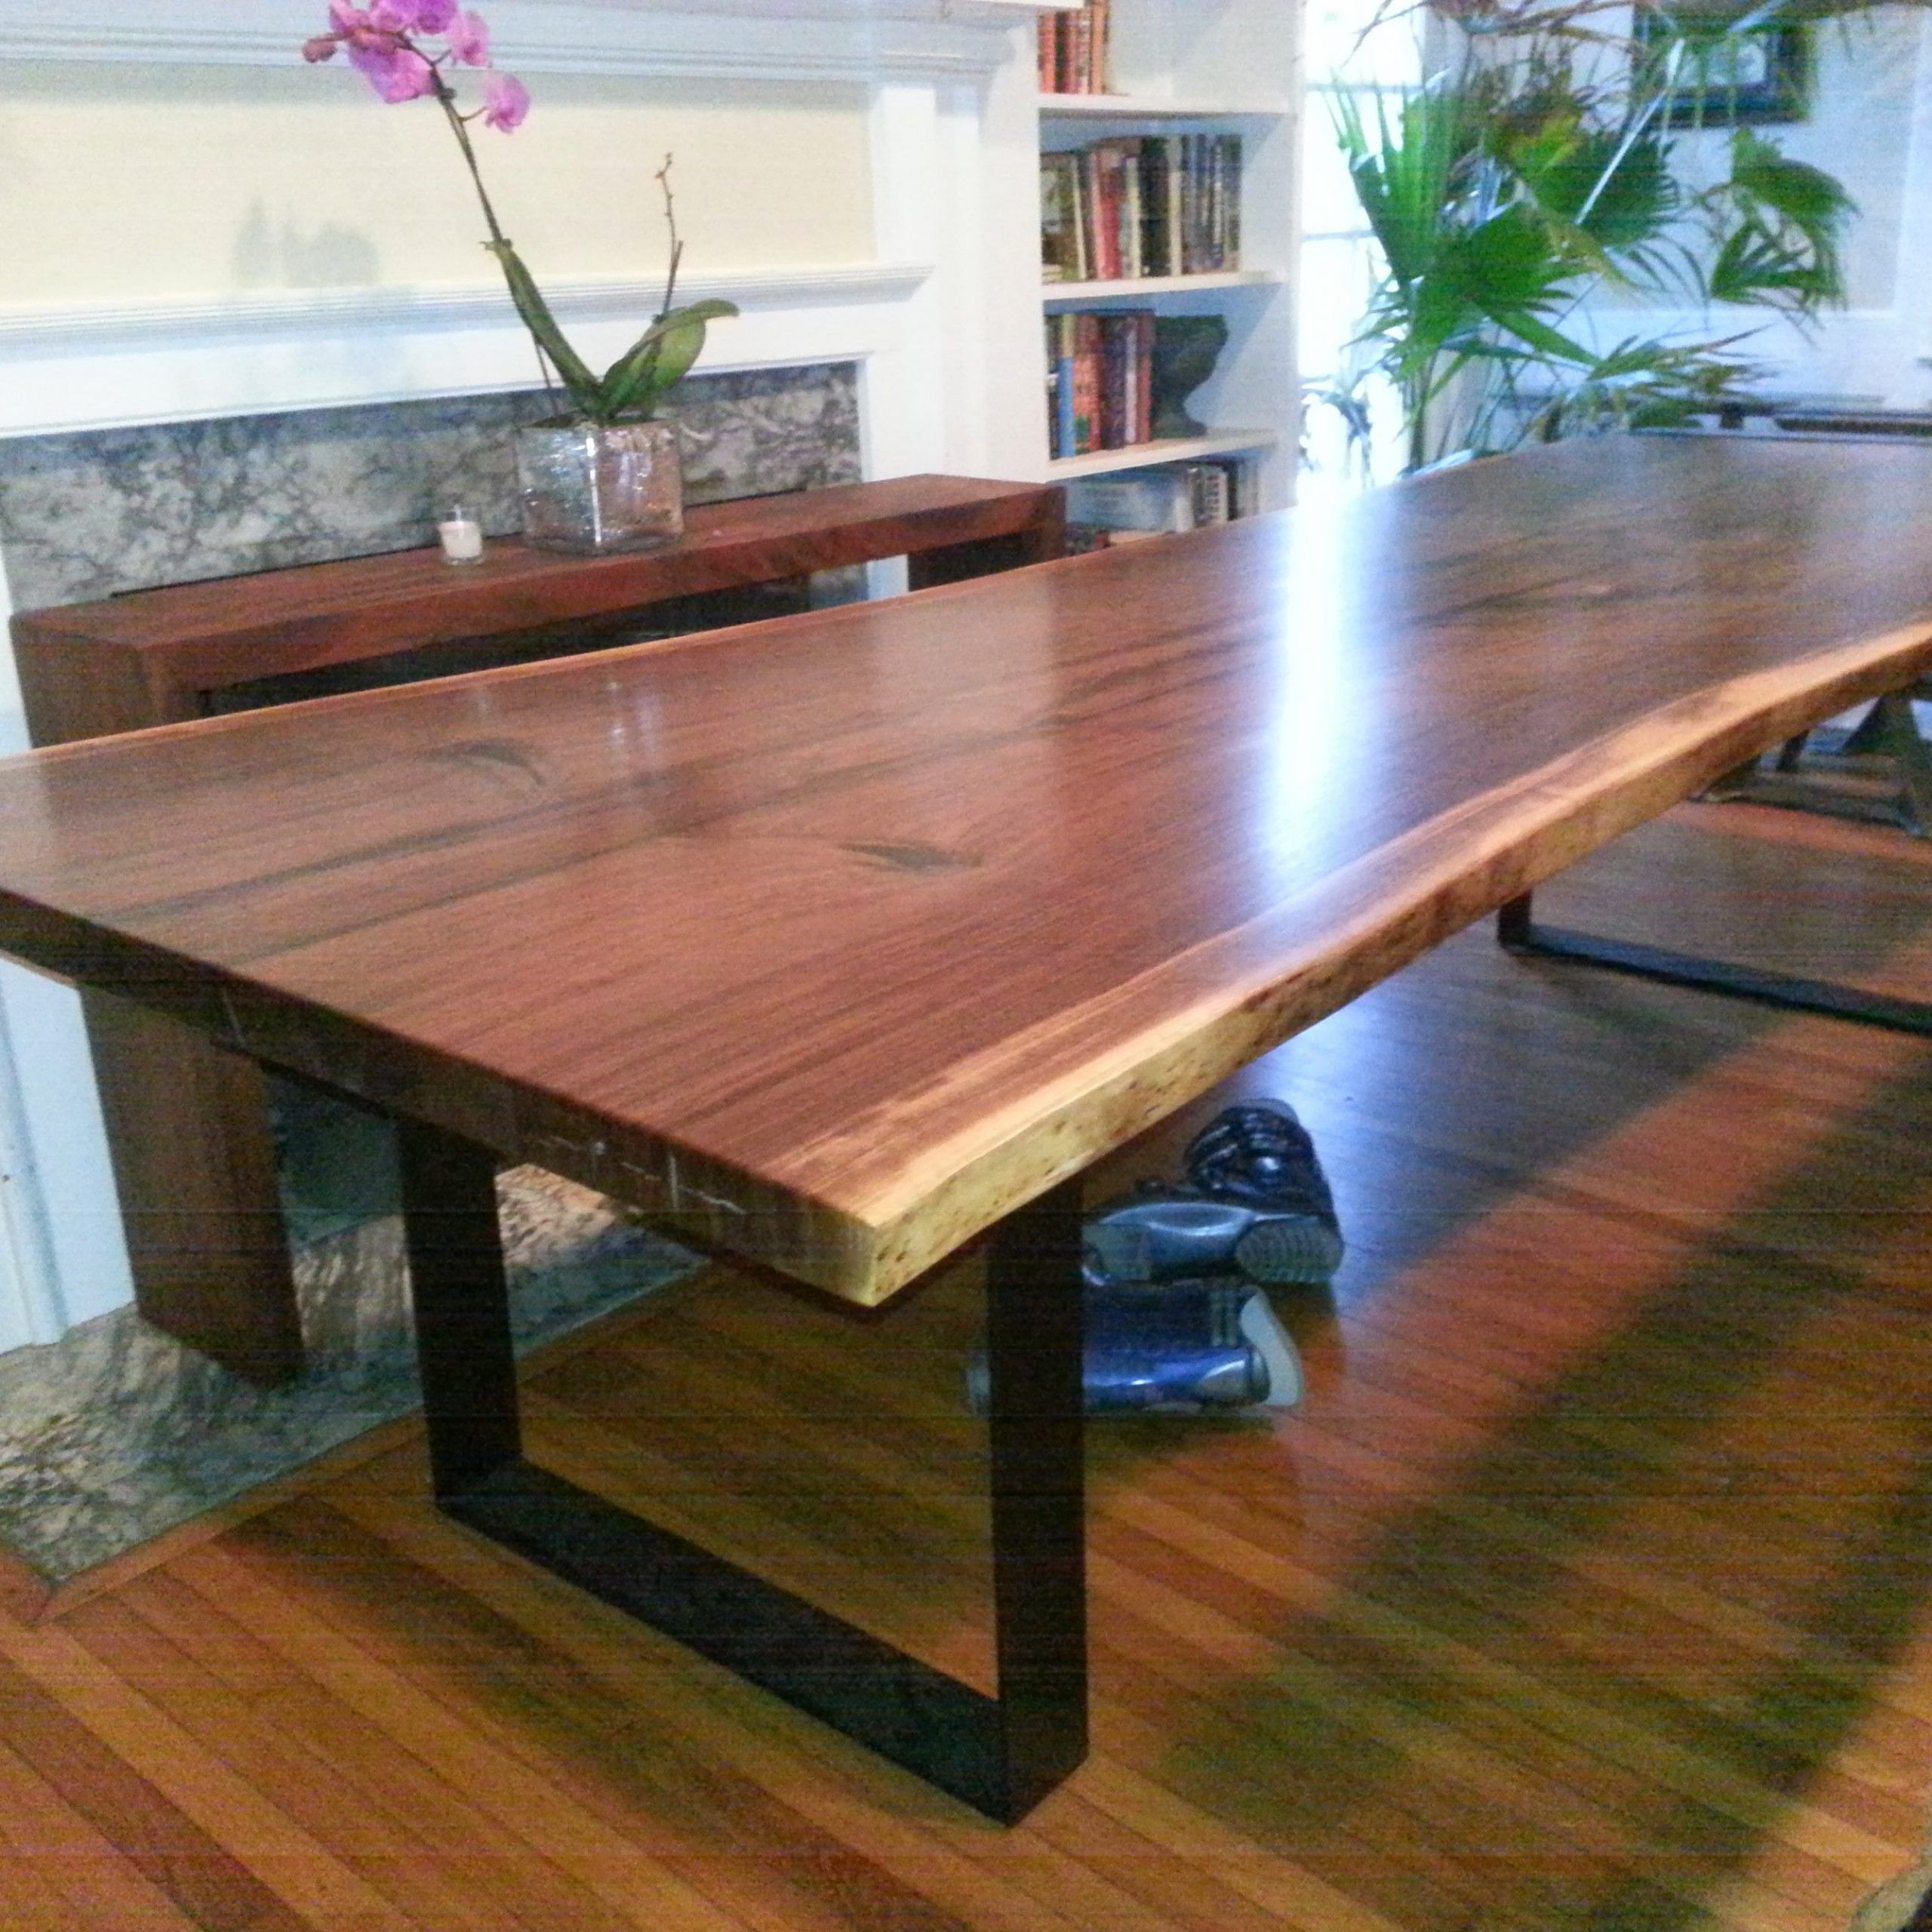 Popular 10'x4' Matchbook Black Walnut With Simple, Contemporary Regarding Black And Walnut Dining Tables (View 1 of 20)